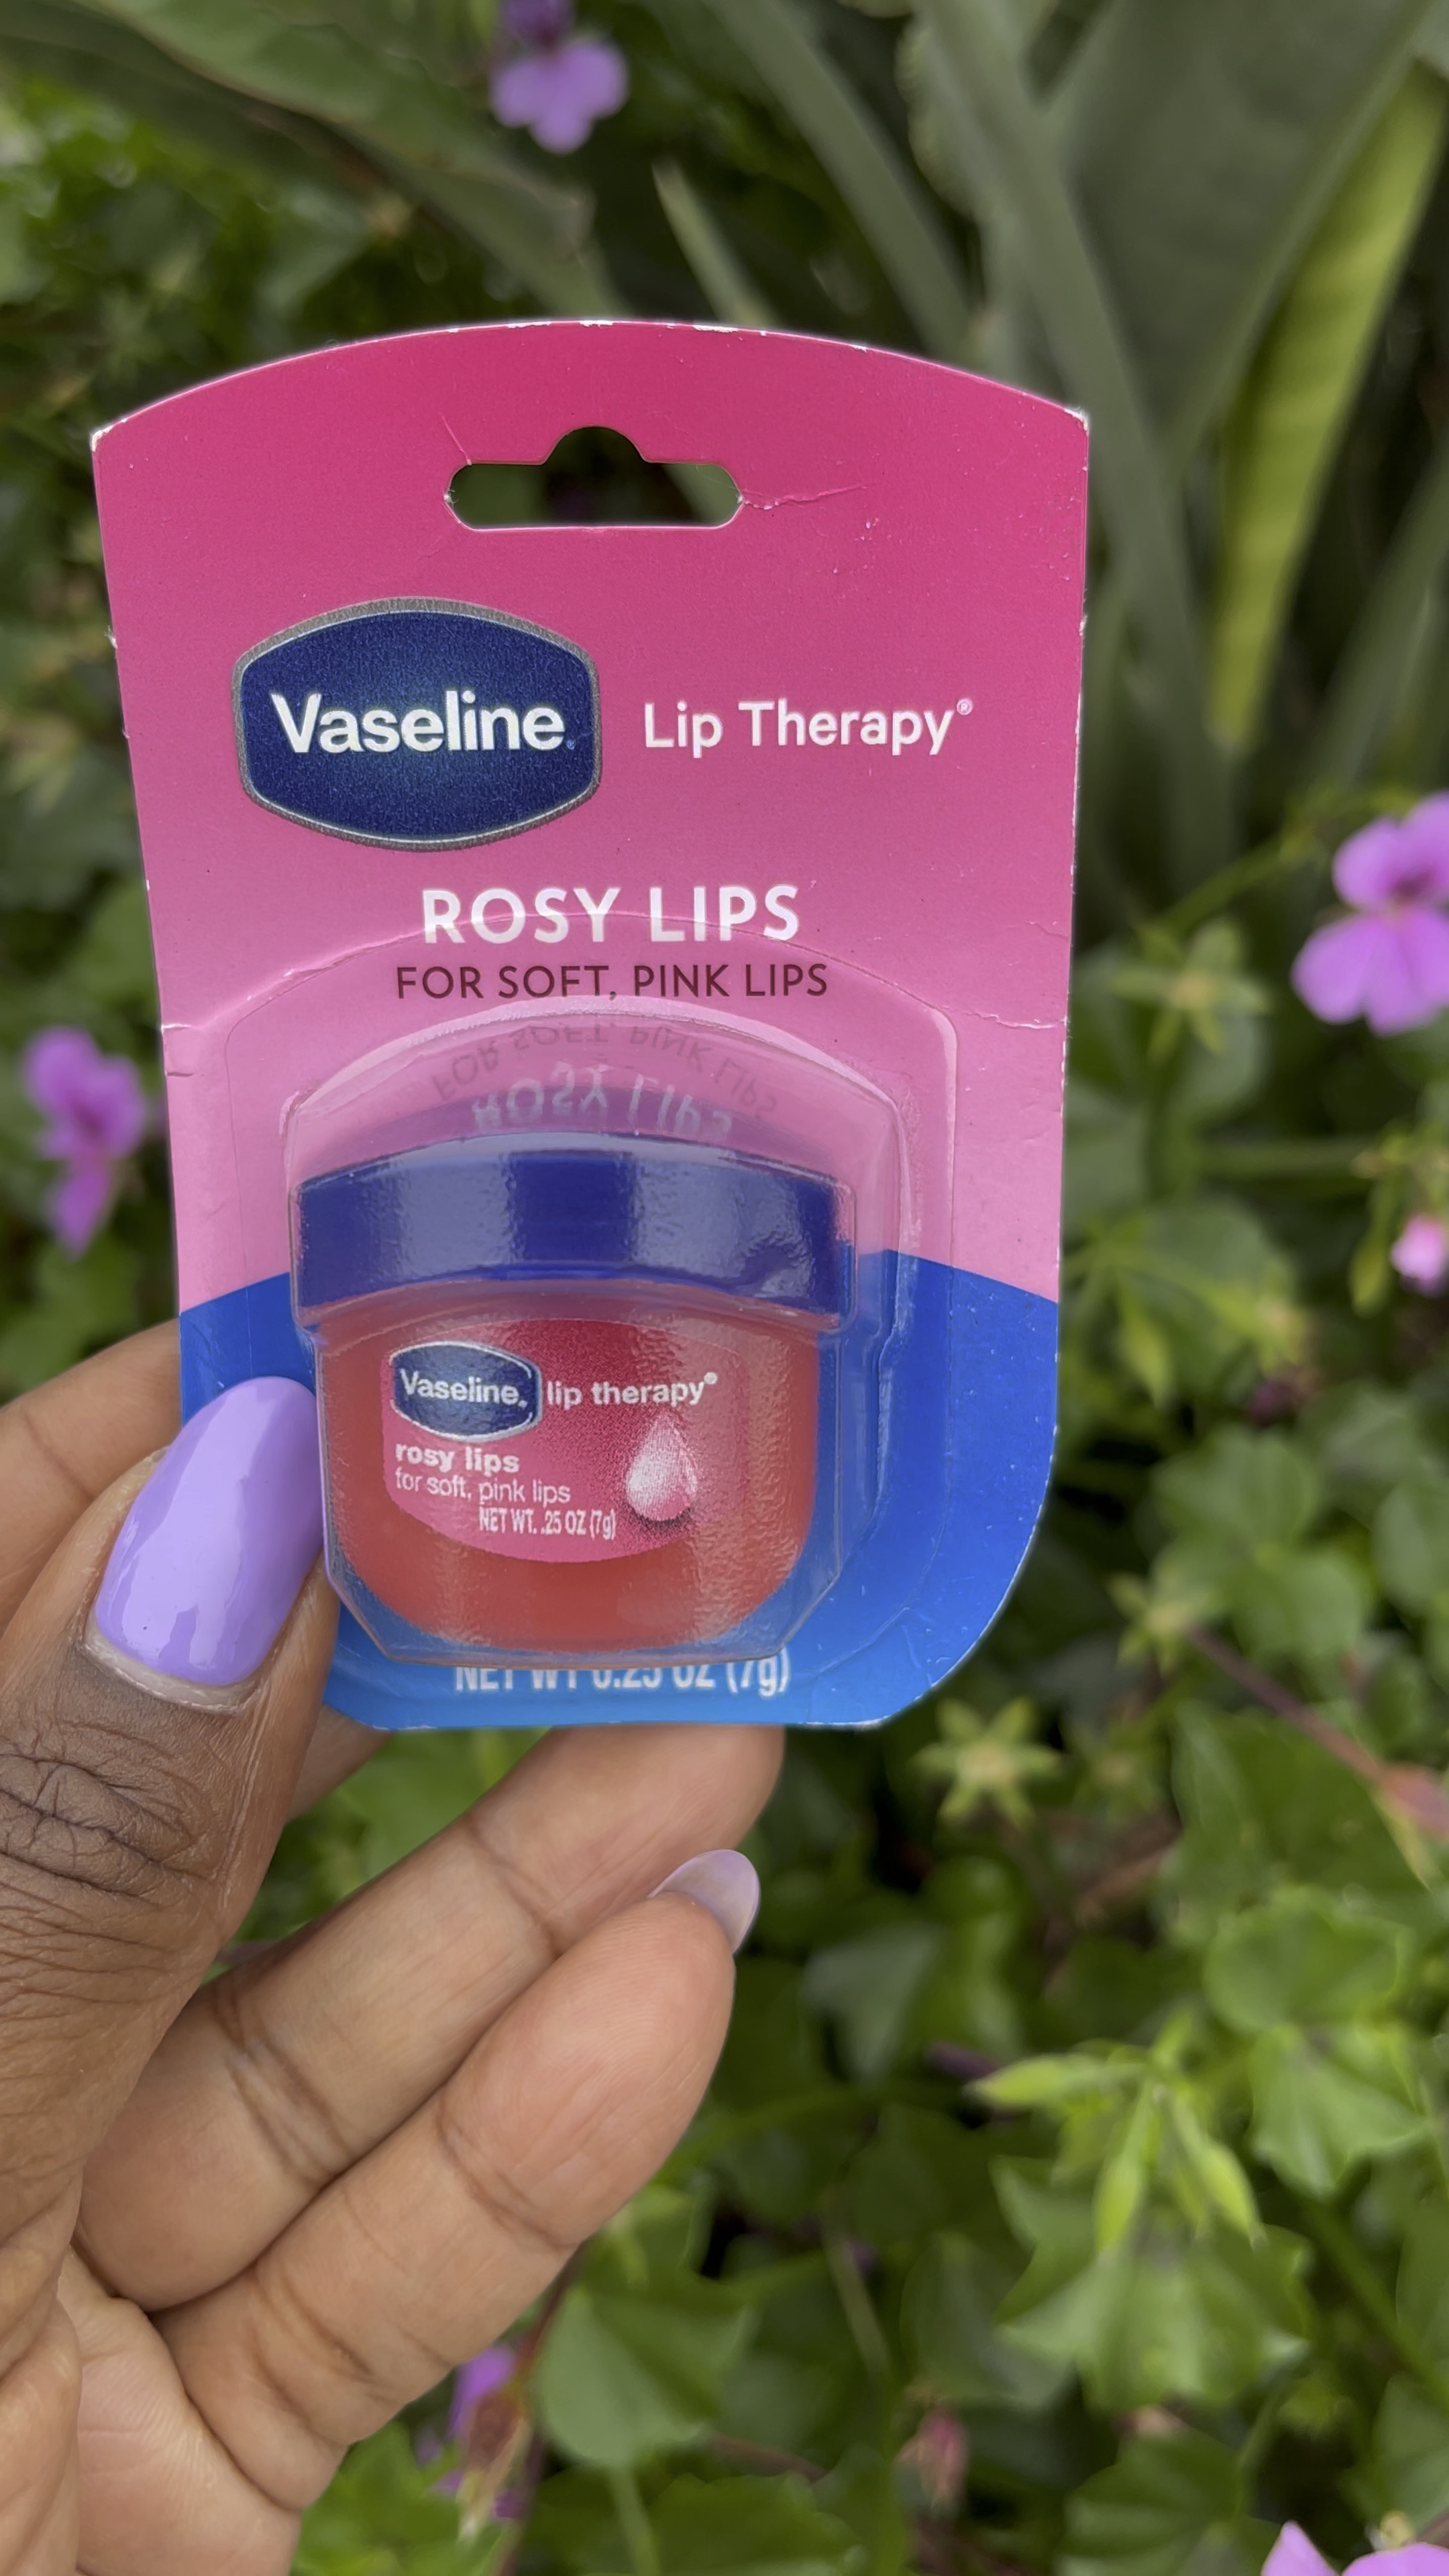 Vaseline Lip Therapy Fragrance Free Original Twin Pack - 2ct/0.5oz